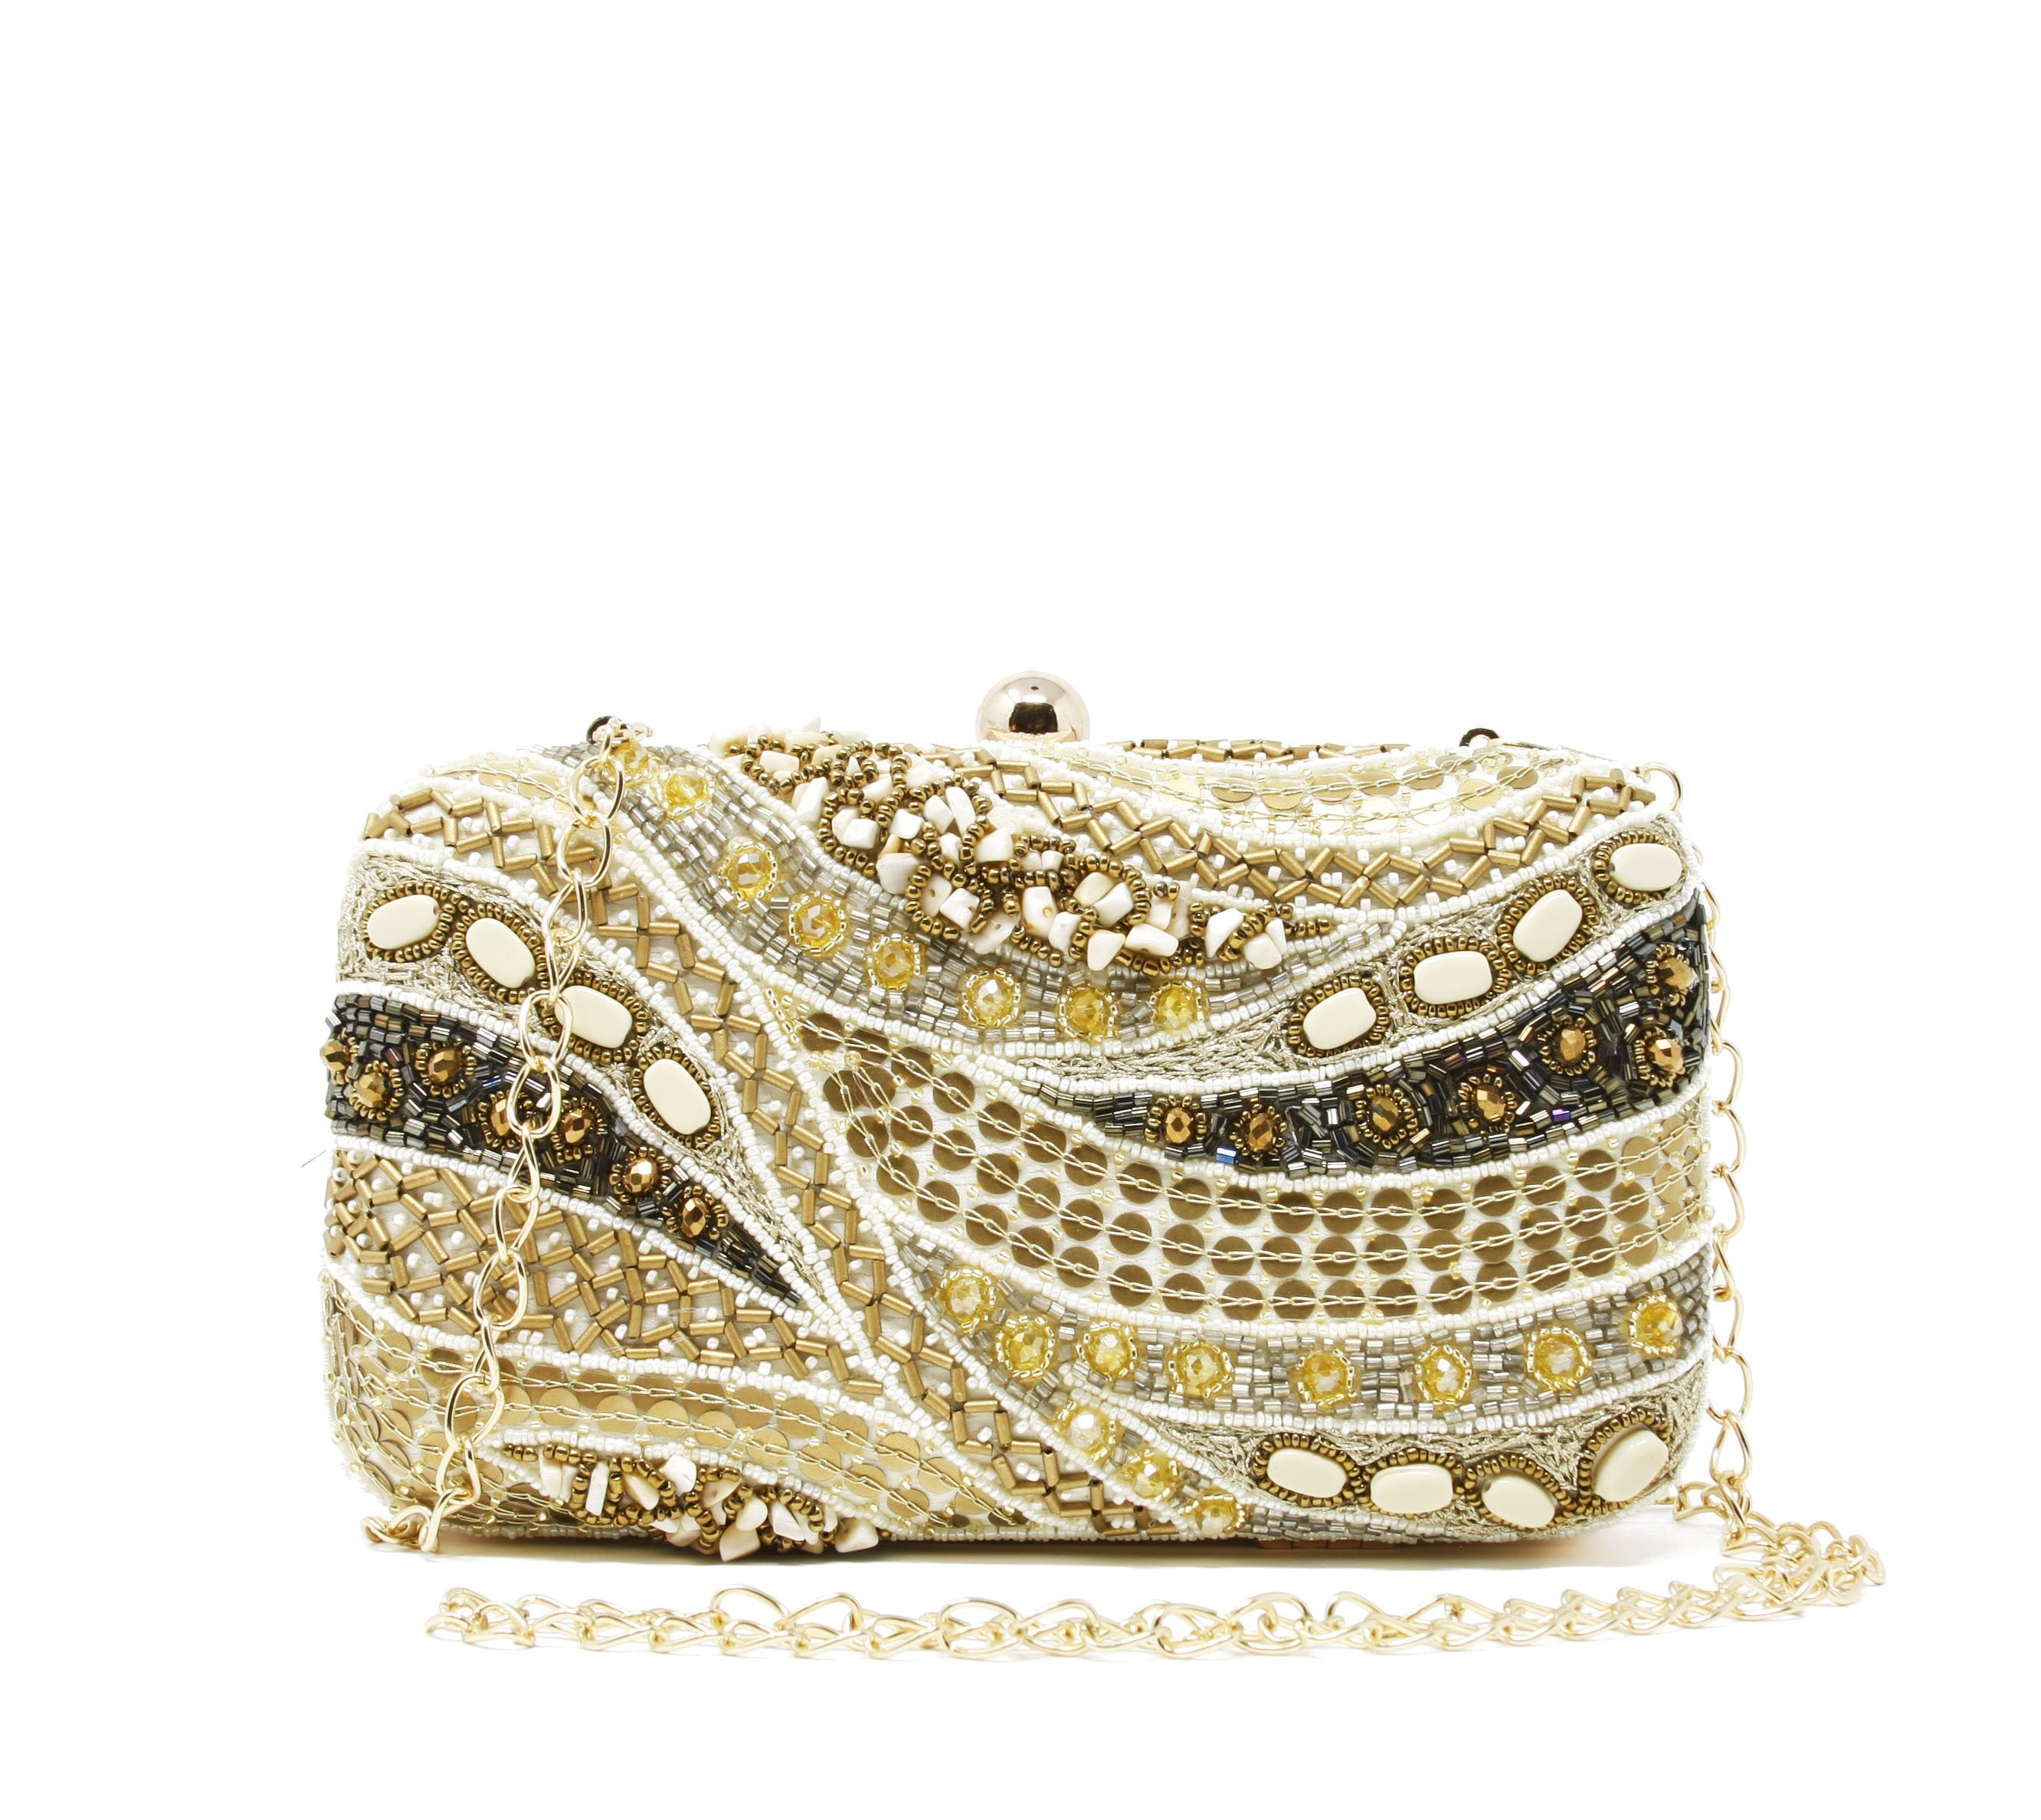 Sparkly White and Cream Clutch with evening bag Hard box case. fold-over clasp closure